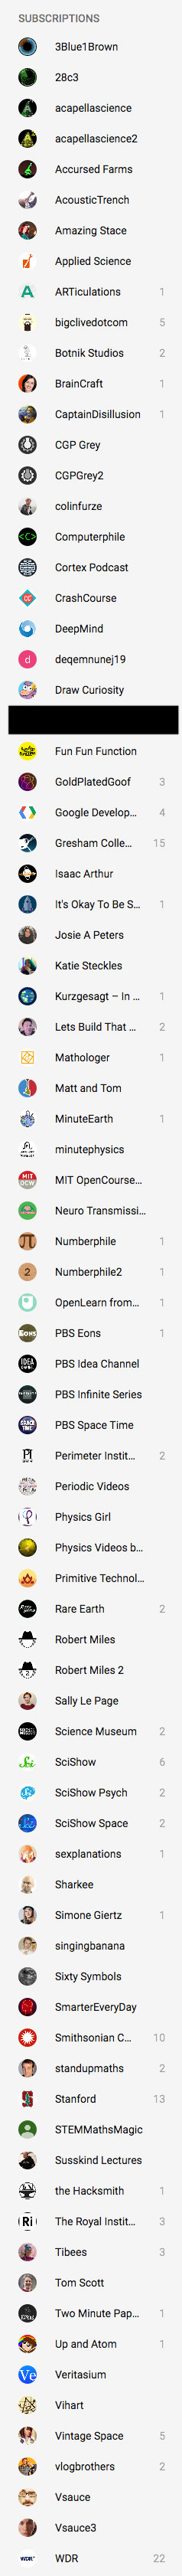 List of my current YouTube subscriptions. It's very long.